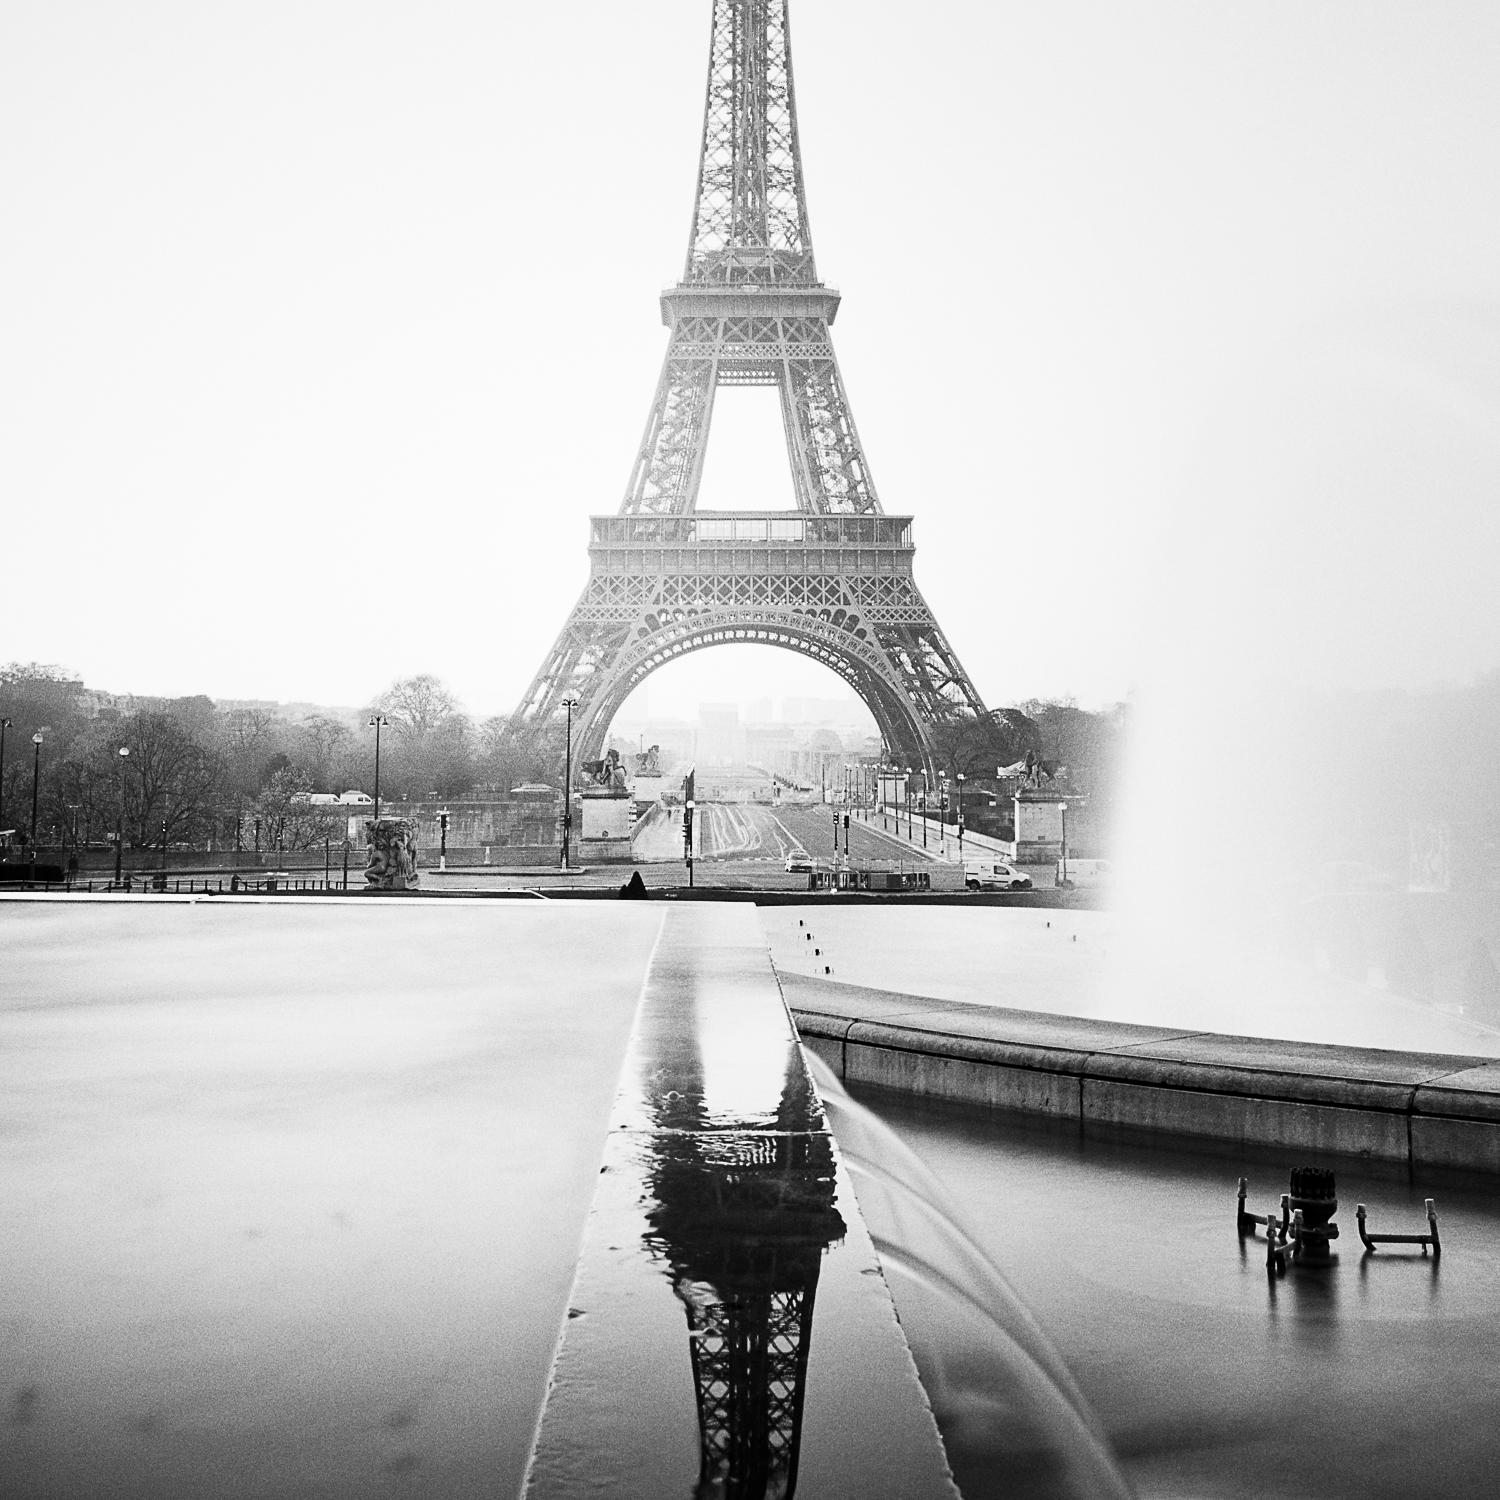 Eiffel Tower, Paris, black and white gelatin silver fineart photography, framed - Photograph by Gerald Berghammer